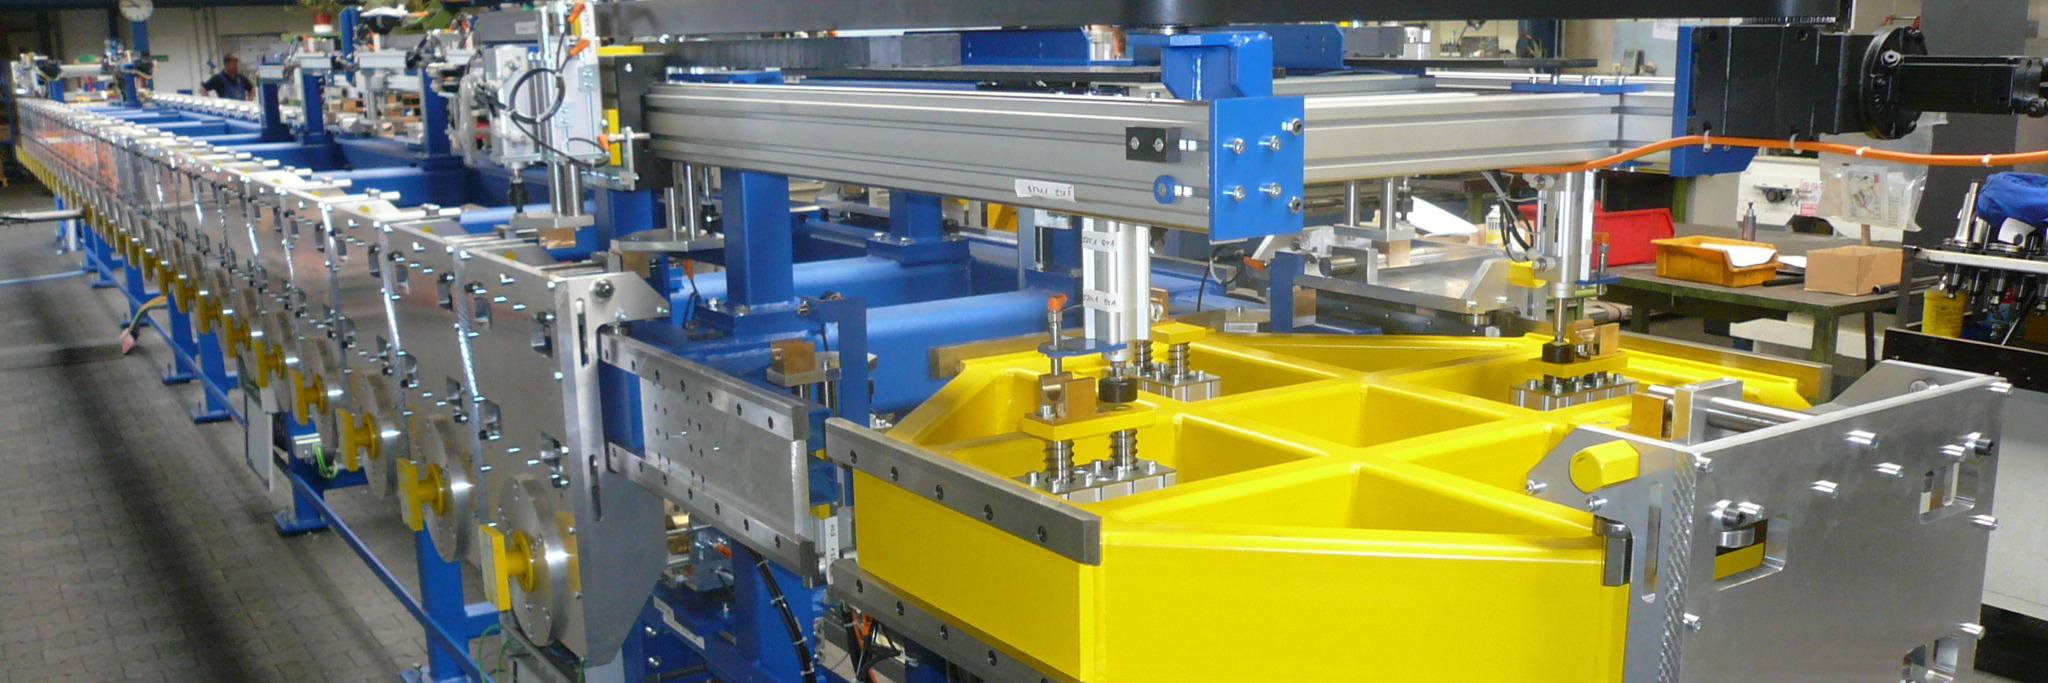 Conveying system for automotive parts